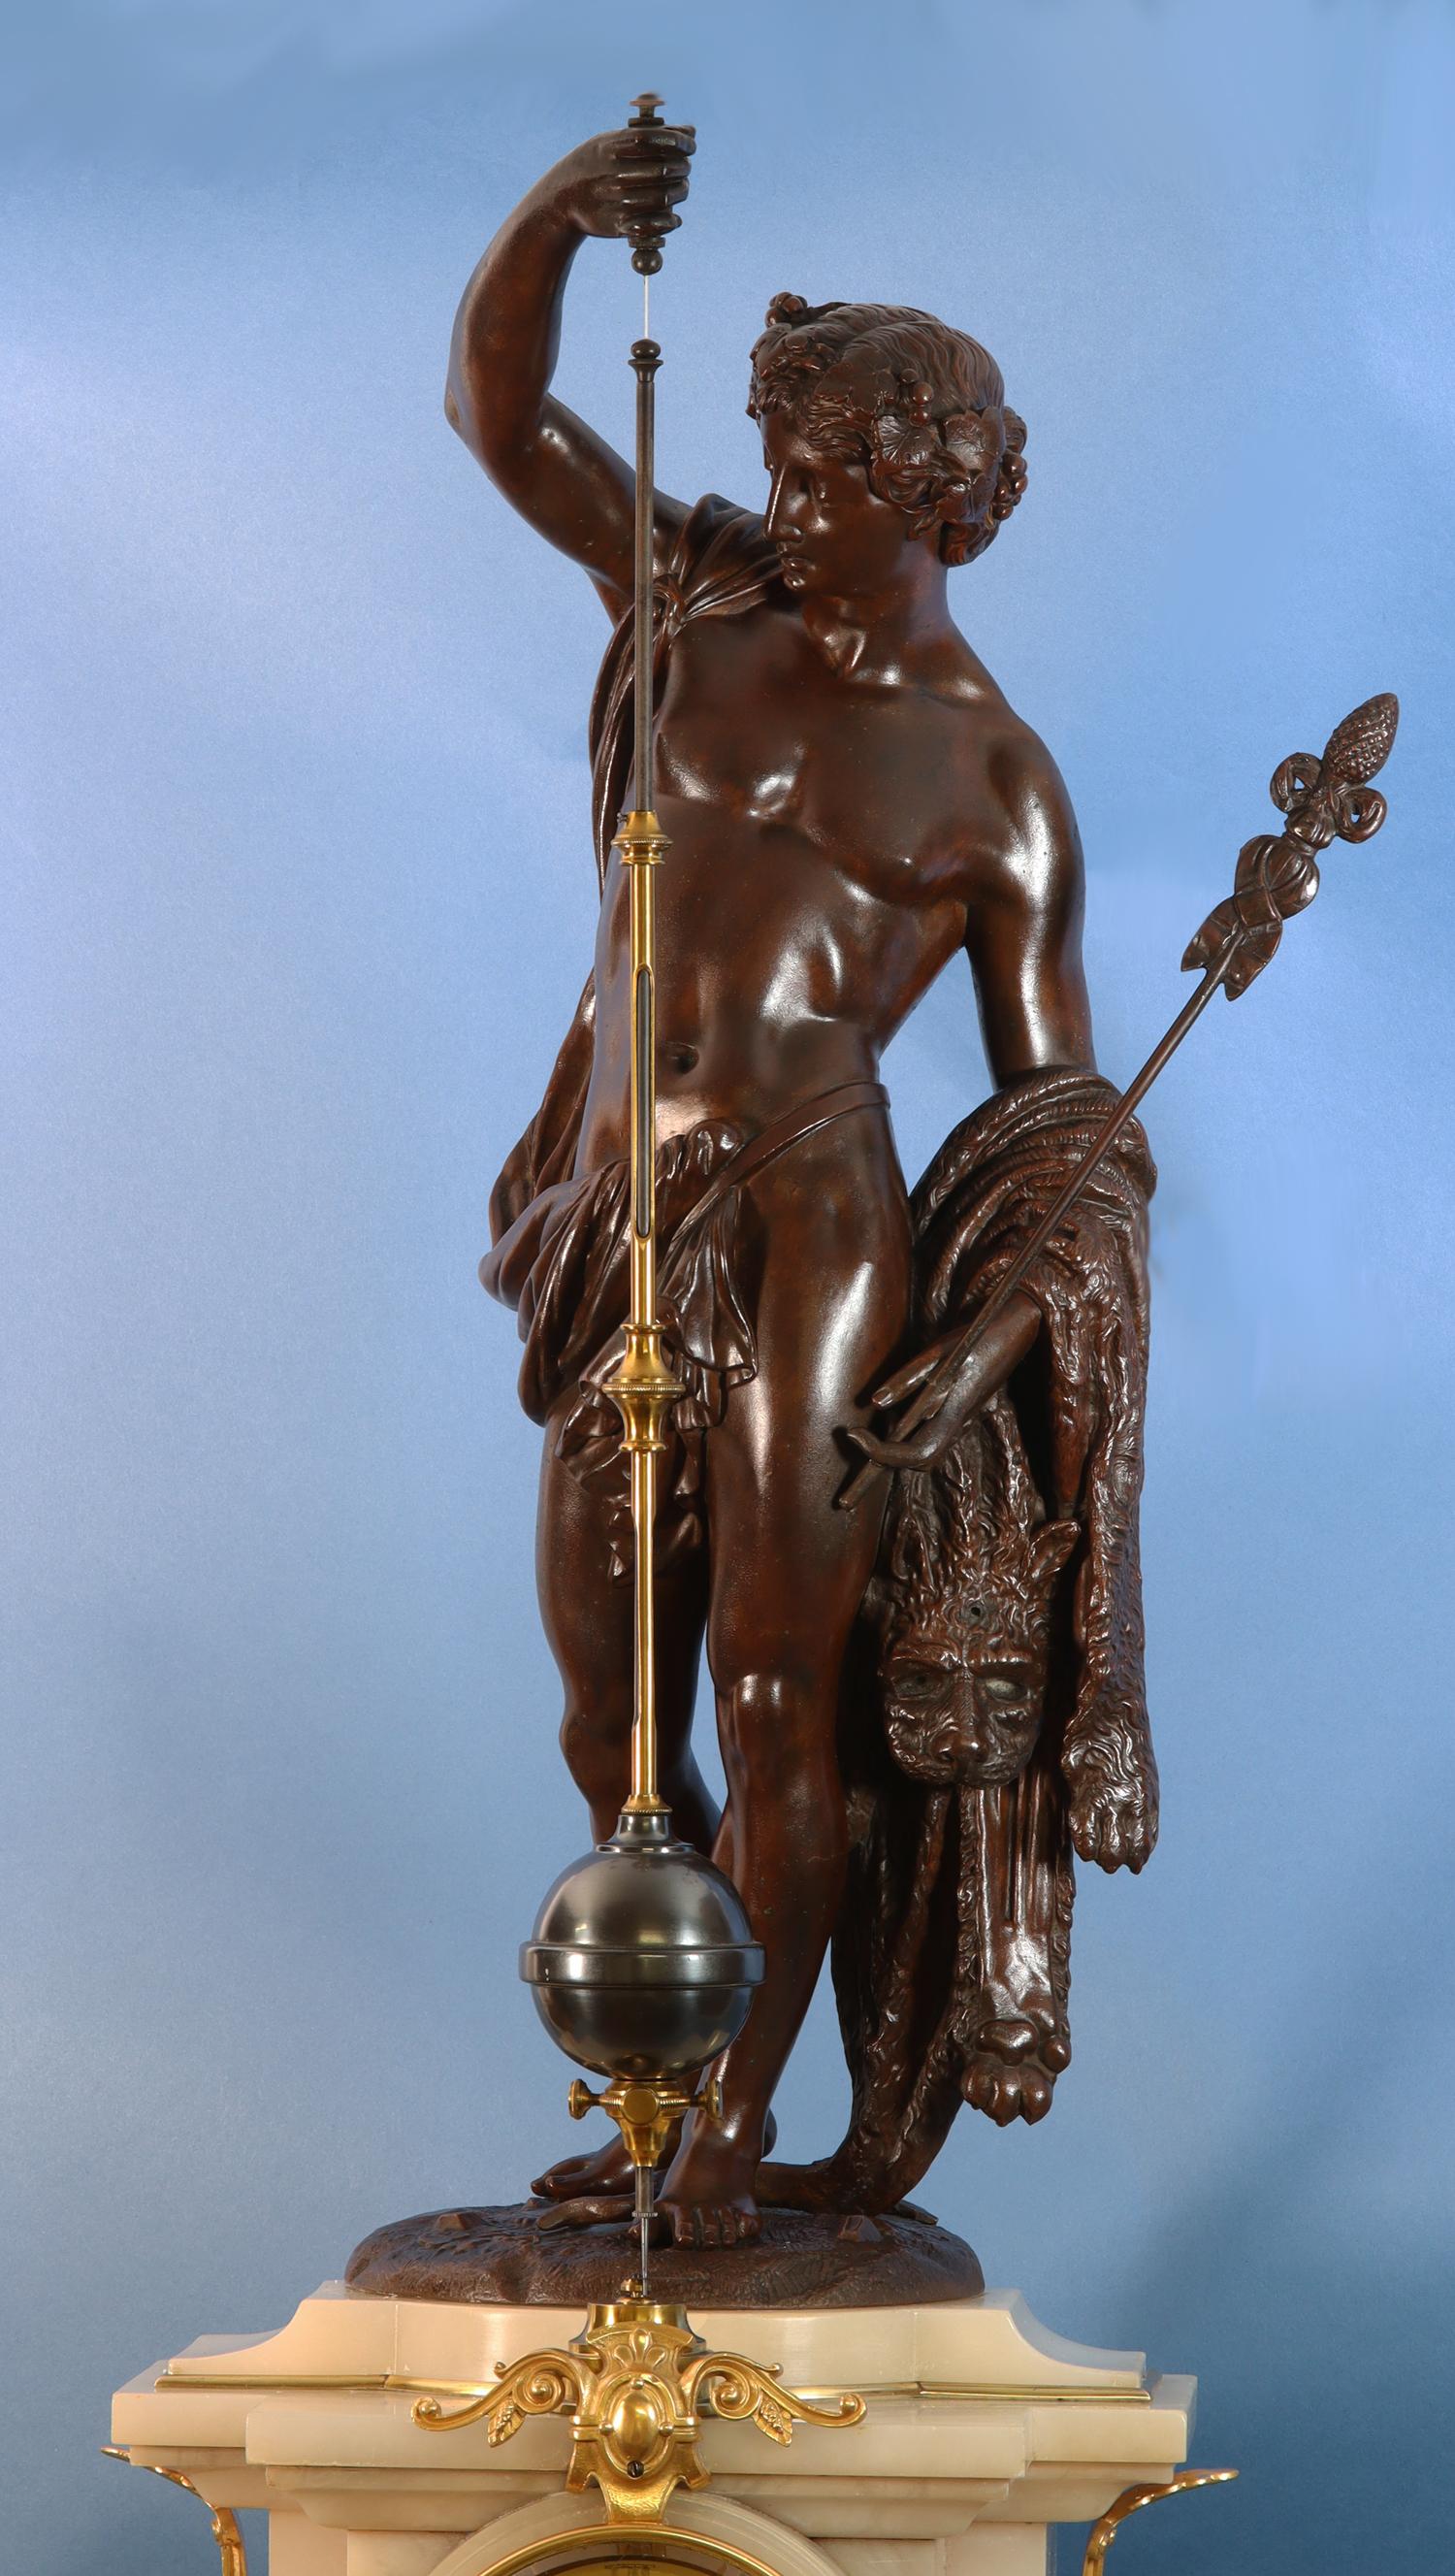 A beautiful mid-19th century French conical clock with a patinated metal figure of Jason holding the golden fleece. 

The decorative alabaster case is adorned with gilt bronze mounts and supports a large patinated figure of Jason. 
The pendulum is